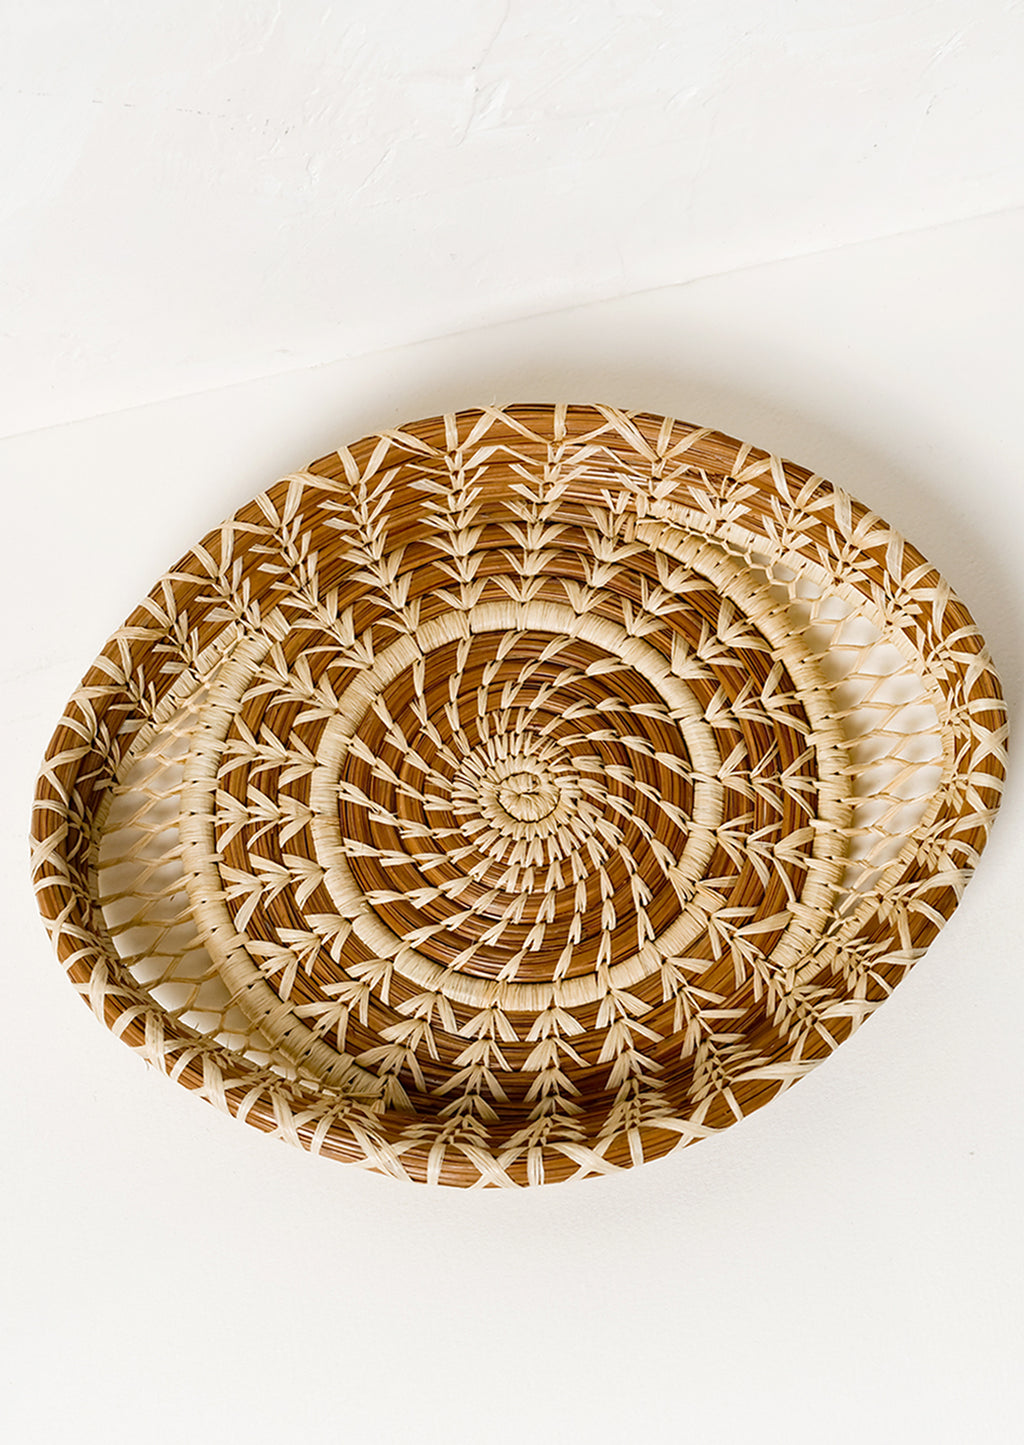 1: A shallow woven pine needle platter with raffia pattern detailing.